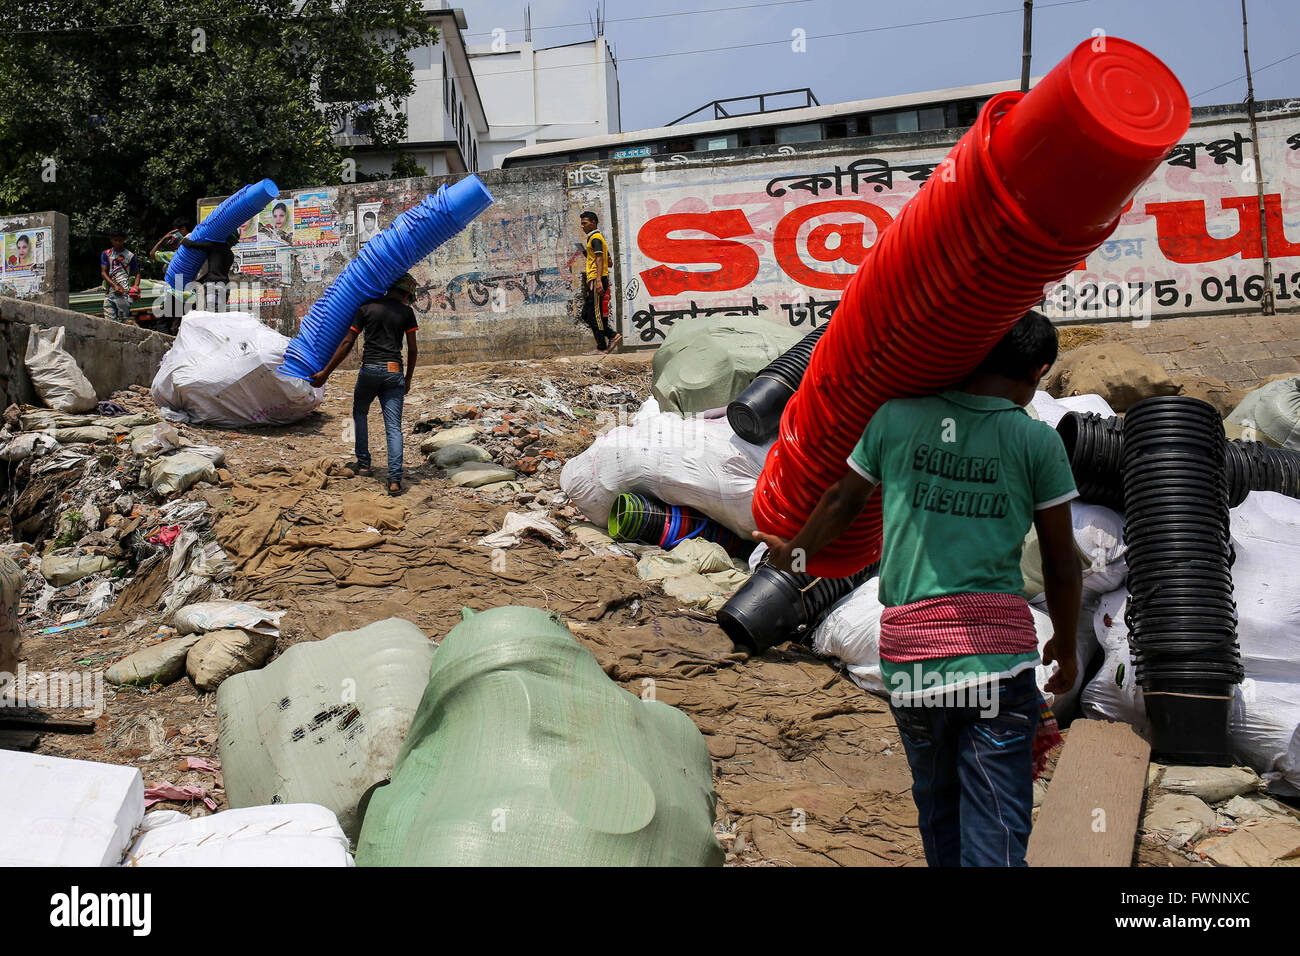 April 6, 2016 - Dhaka, Bangladesh - Workers are carrying plastic buckets. (Credit Image: © Mohammad Ponir Hossain via ZUMA Wire) Stock Photo